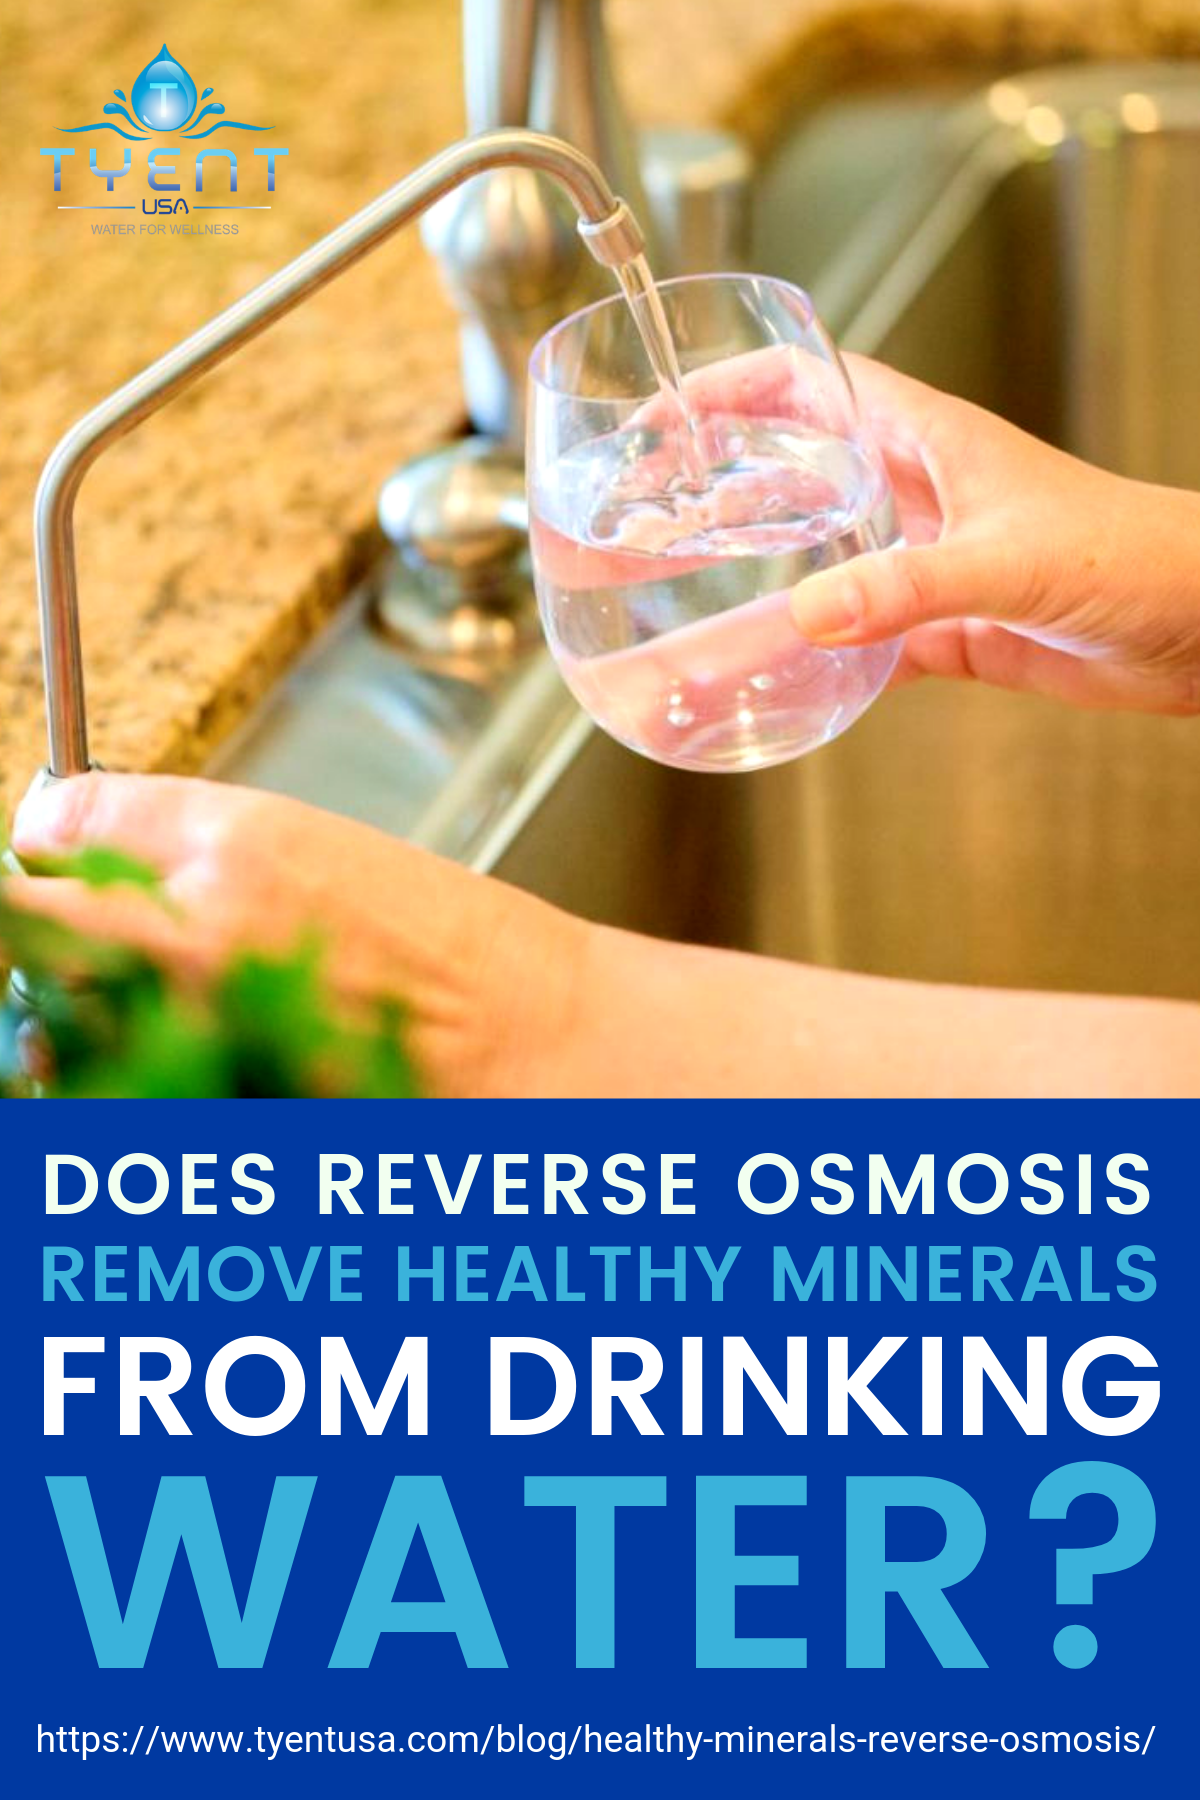 Does Reverse Osmosis Remove Healthy Minerals From Drinking Water?